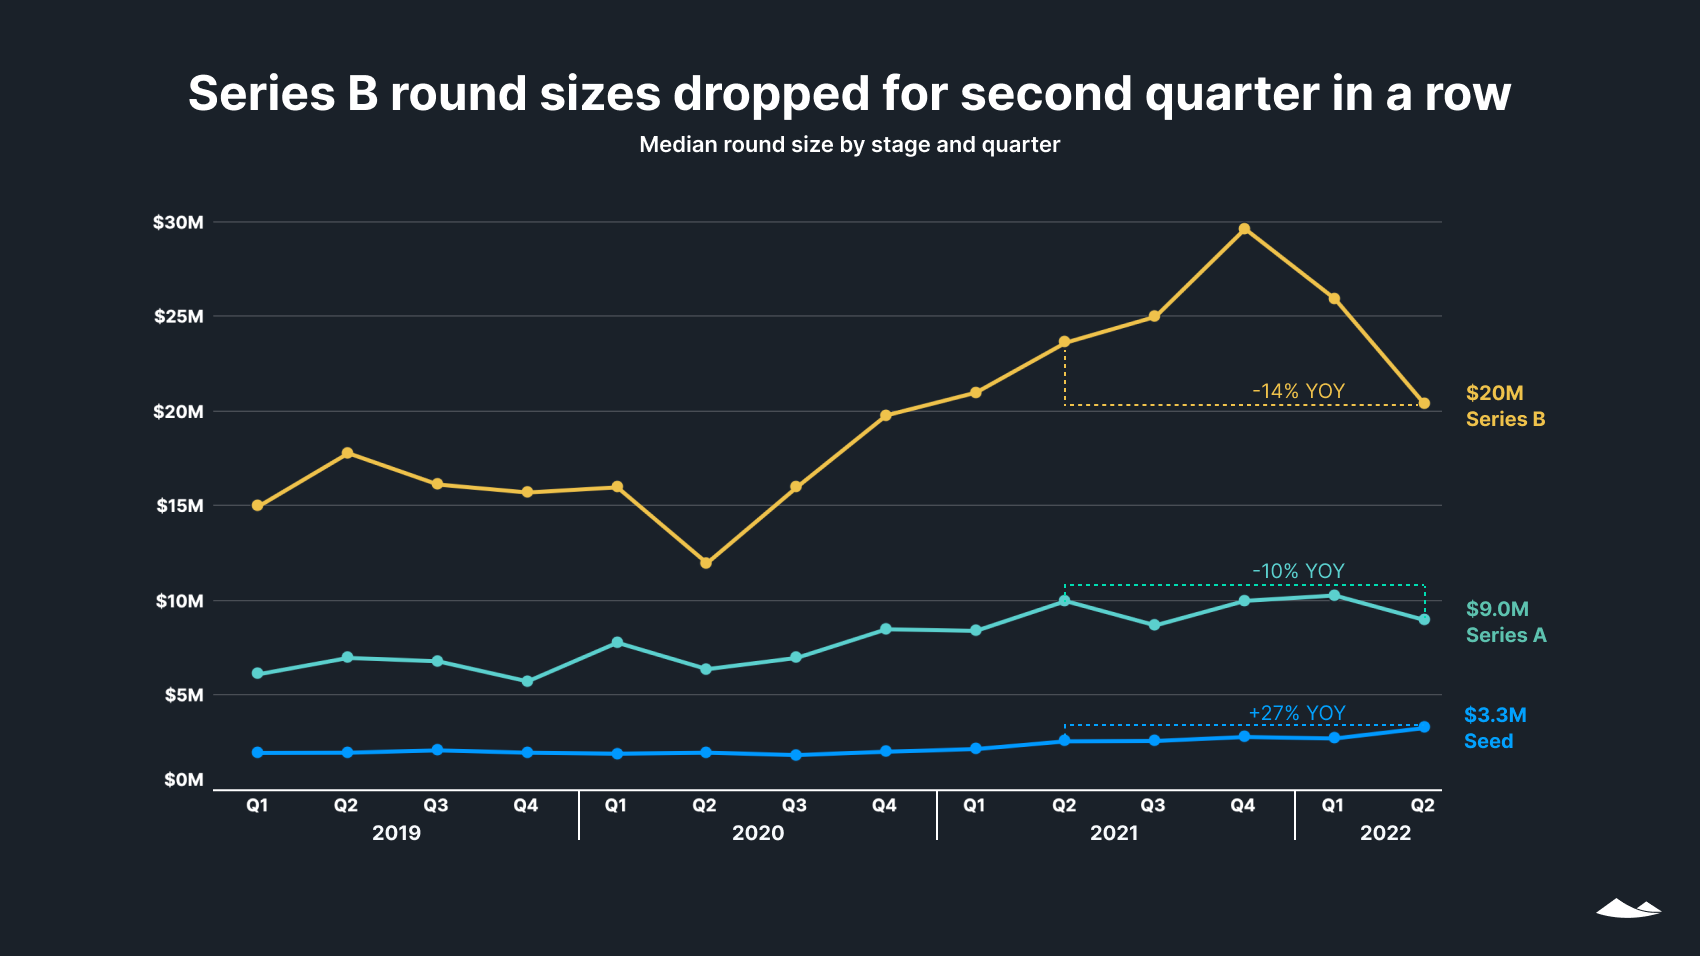 After six straight quarters of steady increases, the median size of a Series B round has plunged for two quarters so far in 2022, falling to $20M in Q2.